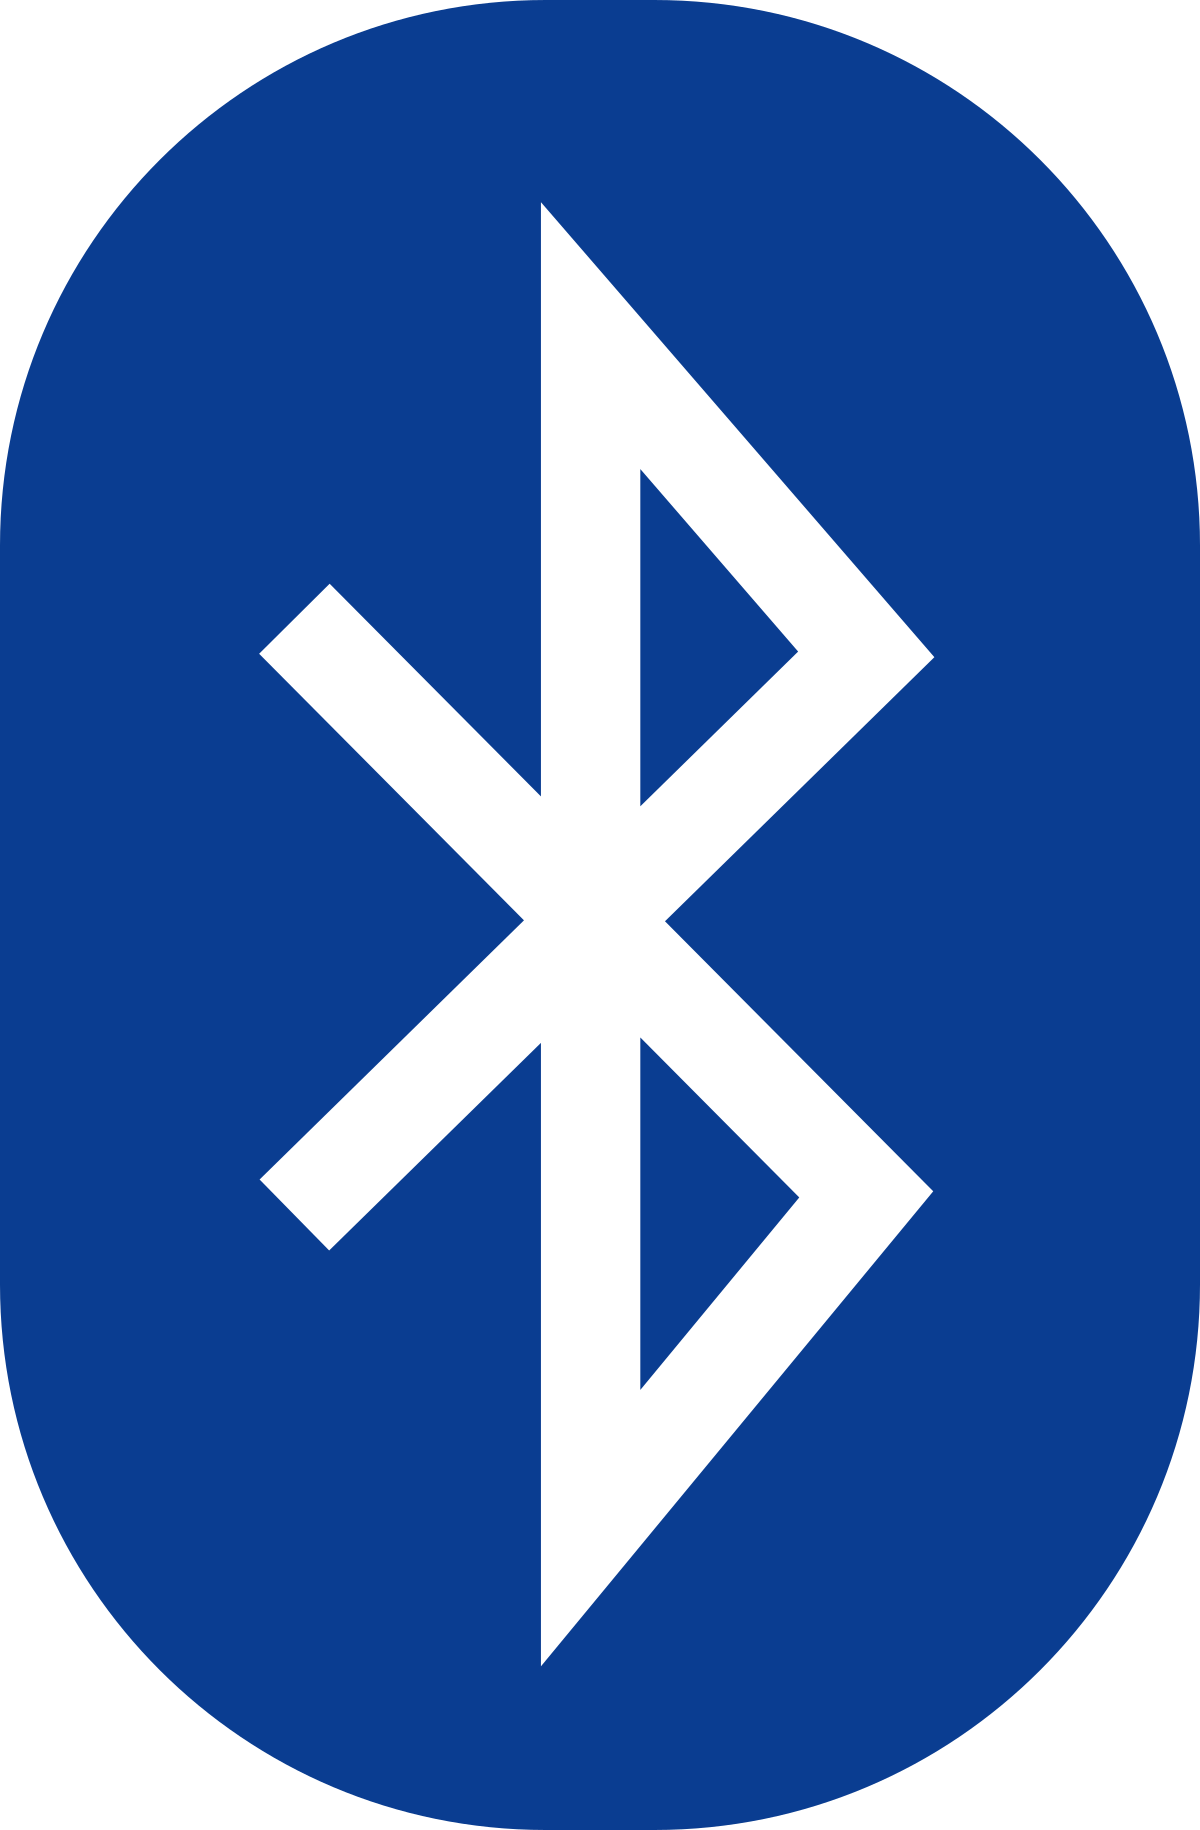 Bluetooth icon or a computer with a Bluetooth symbol.